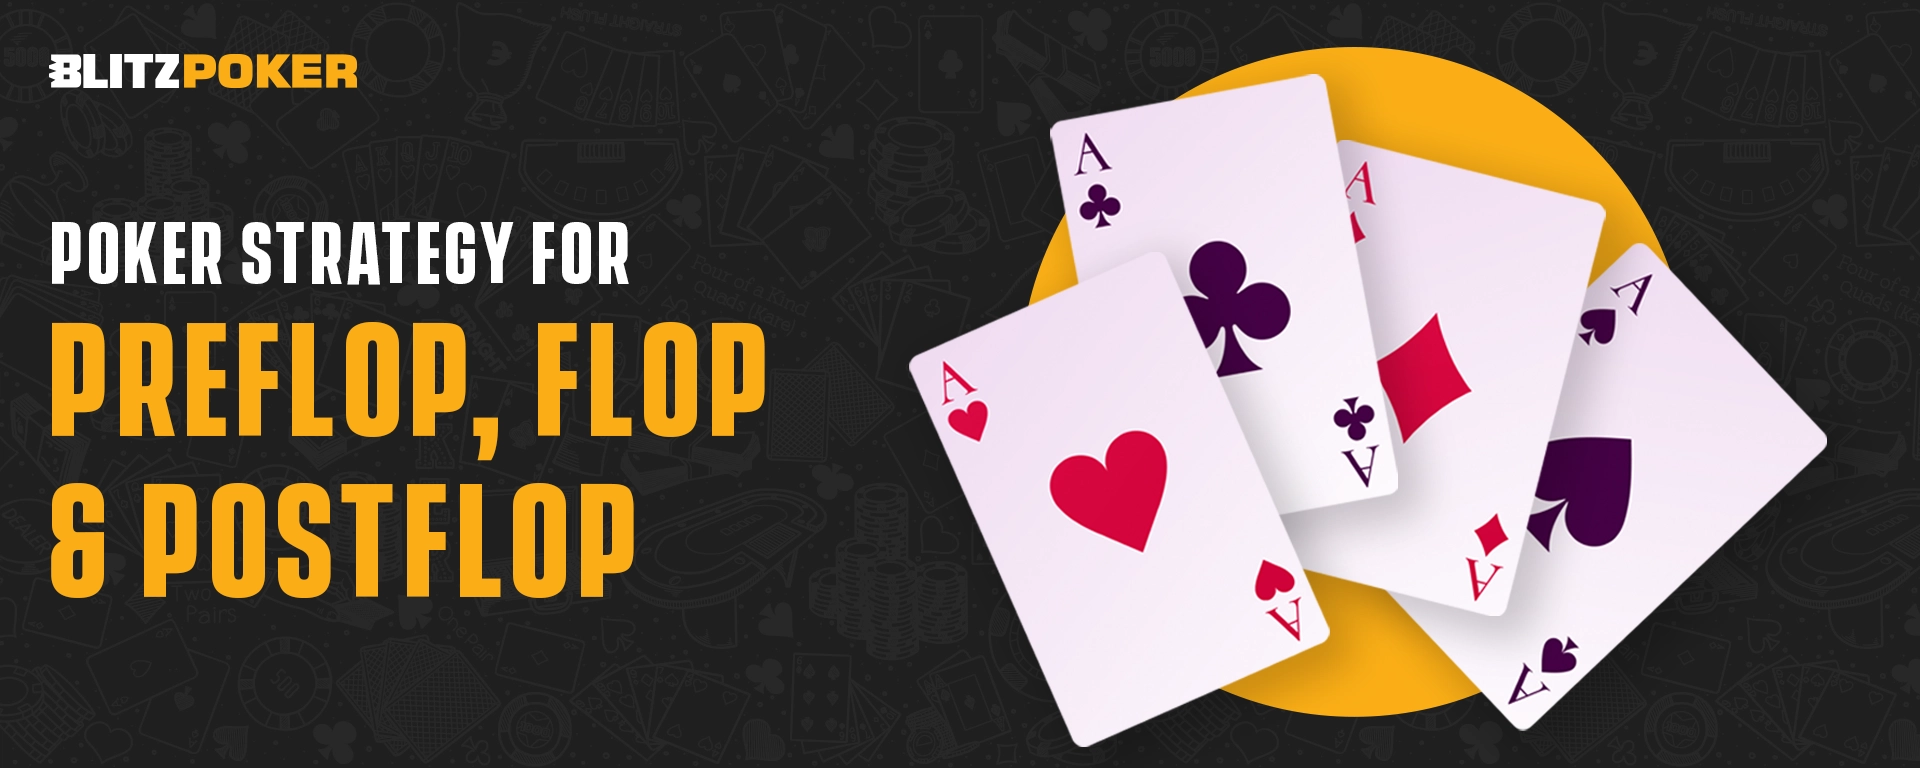 Poker Strategy For Preflop Flop and Postflop